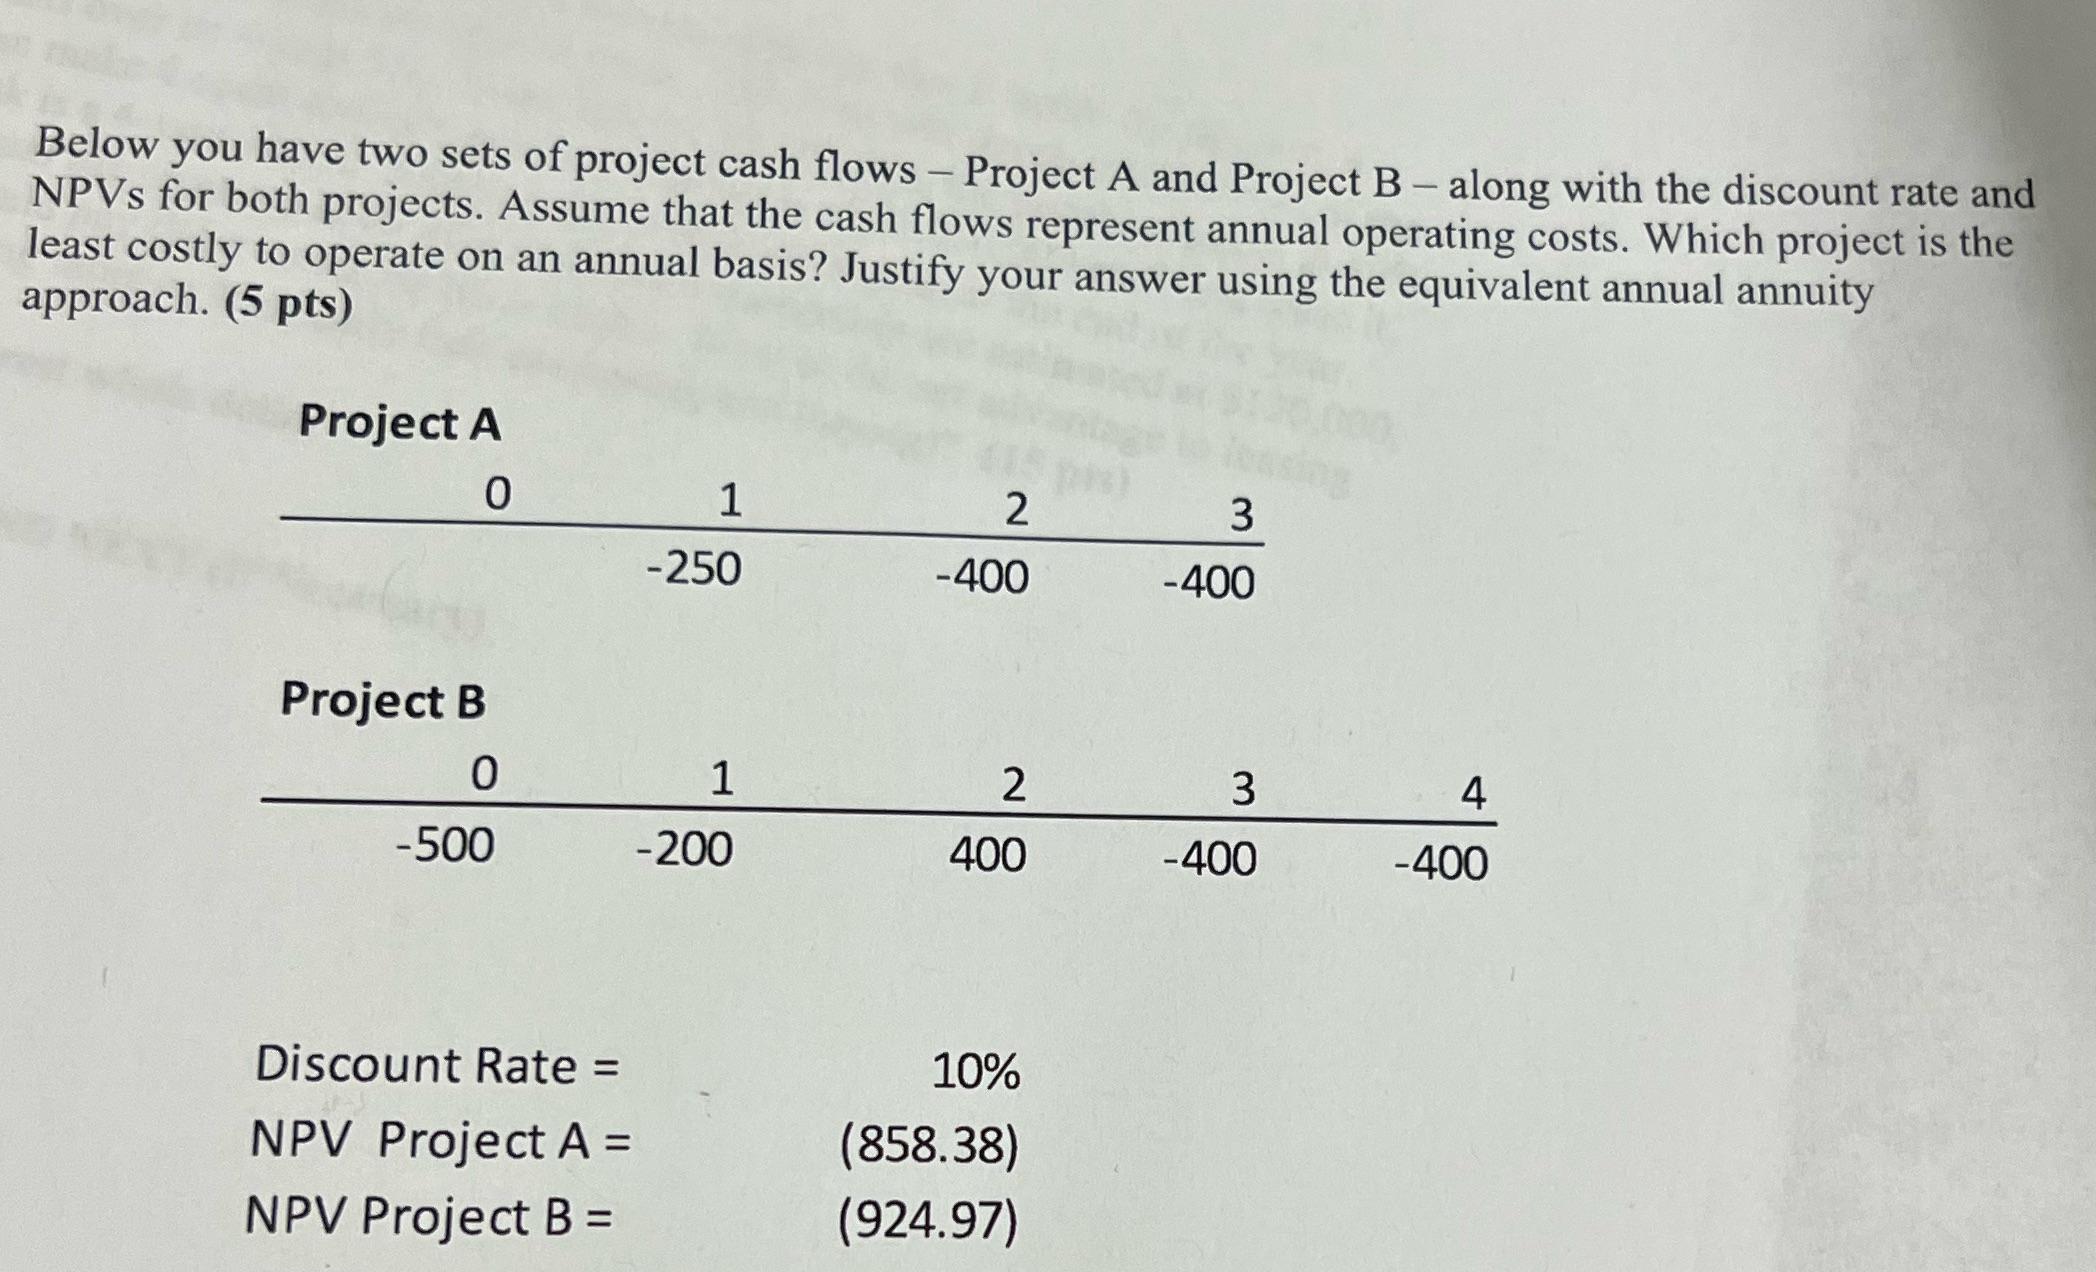 Below you have two sets of project cash flows - Project A and Project B -along with the discount rate and